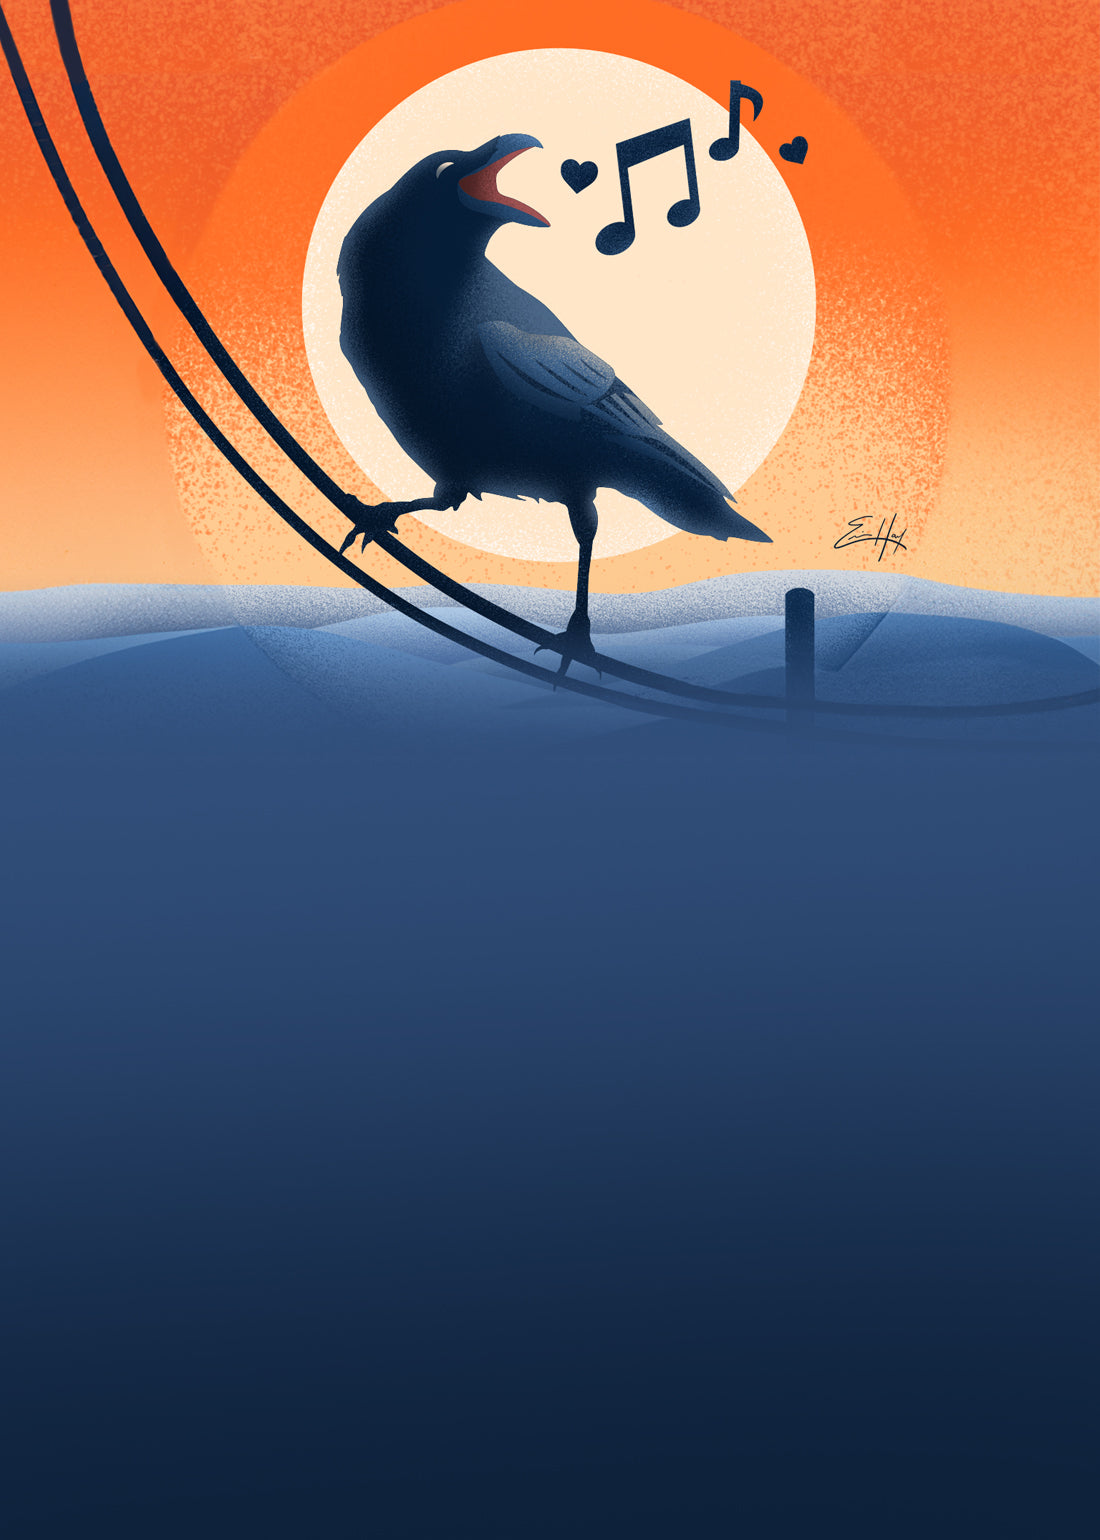 A Syracuse, NY illustration of a crow on a telephone wire